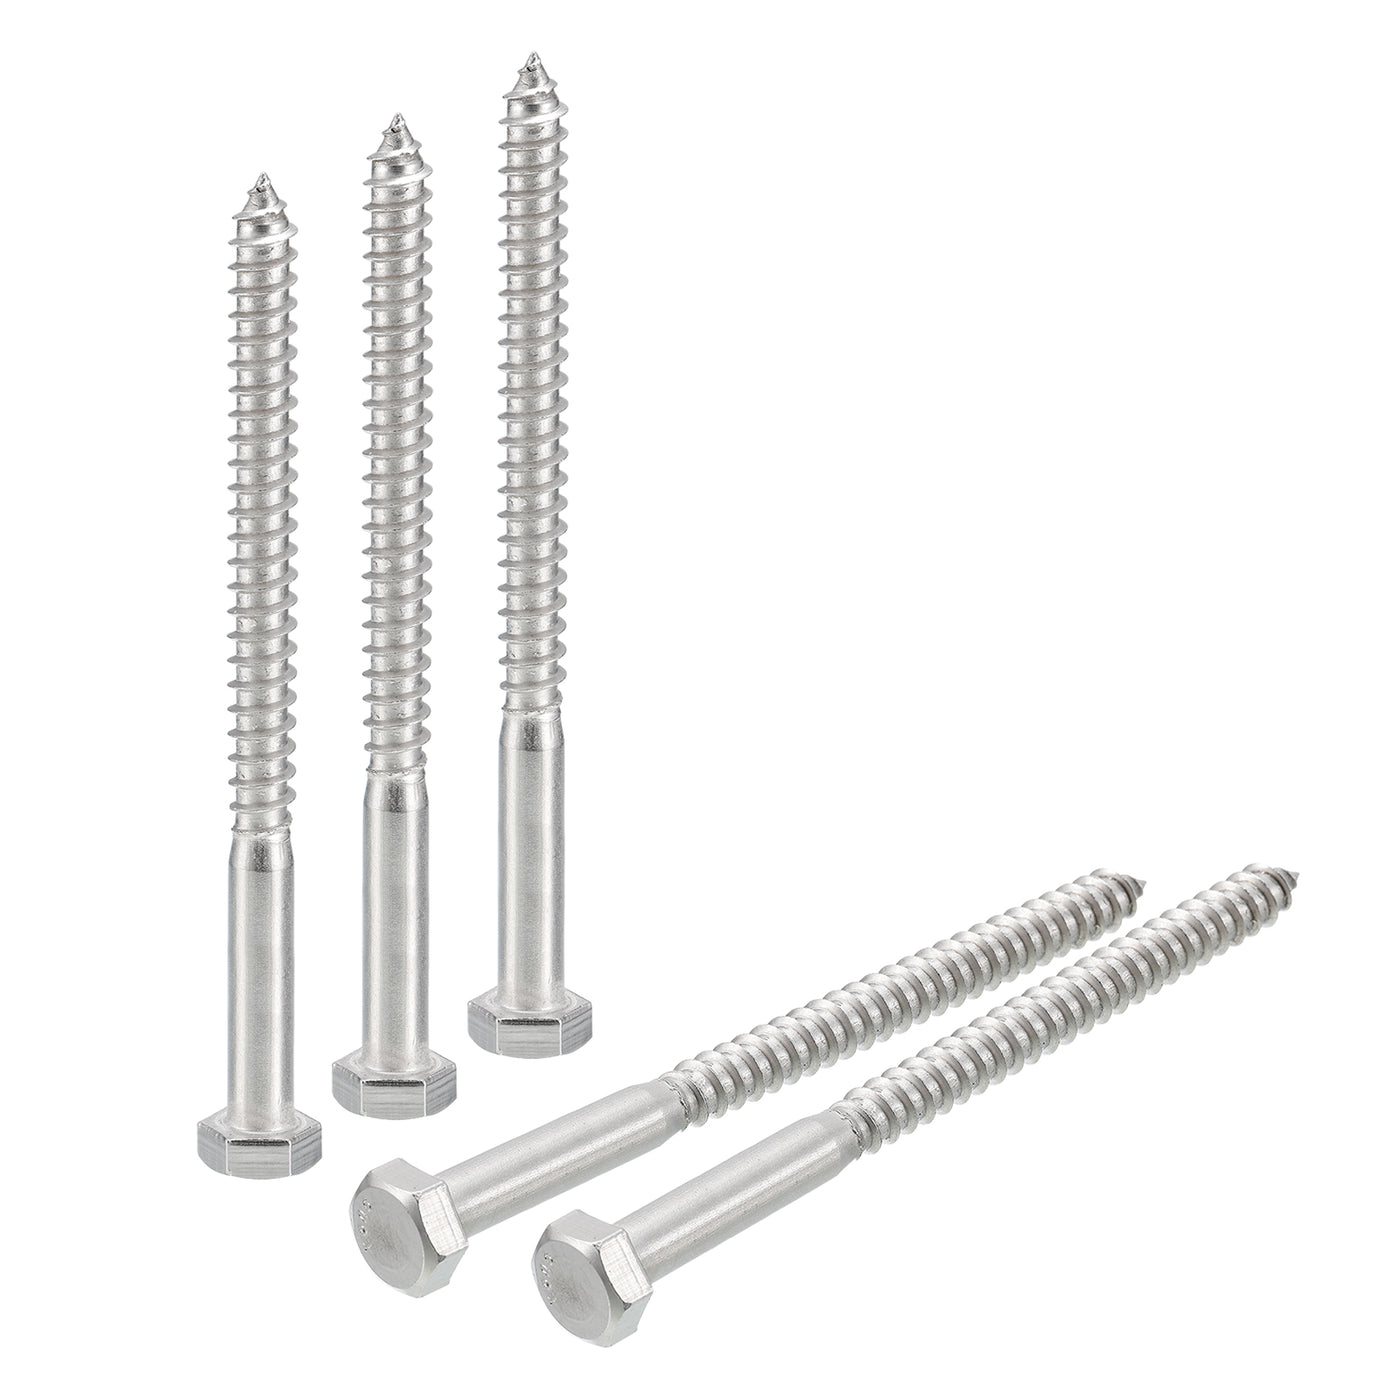 uxcell Uxcell Hex Head Lag Screws Bolts, 20pcs 5/16" x 4" 304 Stainless Steel Wood Screws